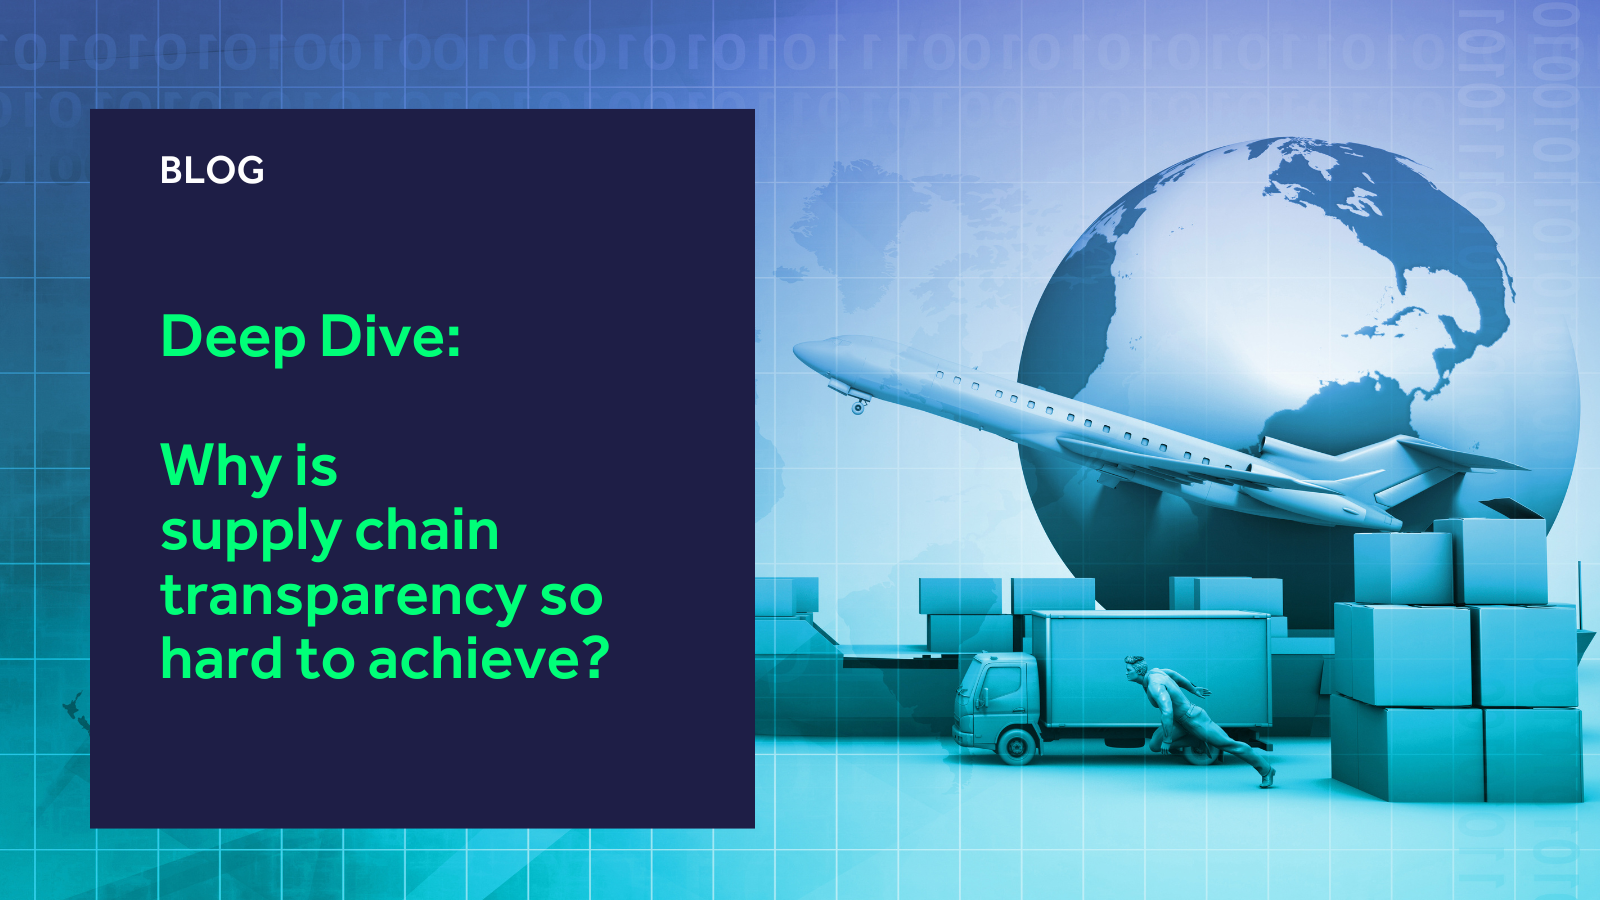 Deep Dive: Why is supply chain transparency so hard to achieve?